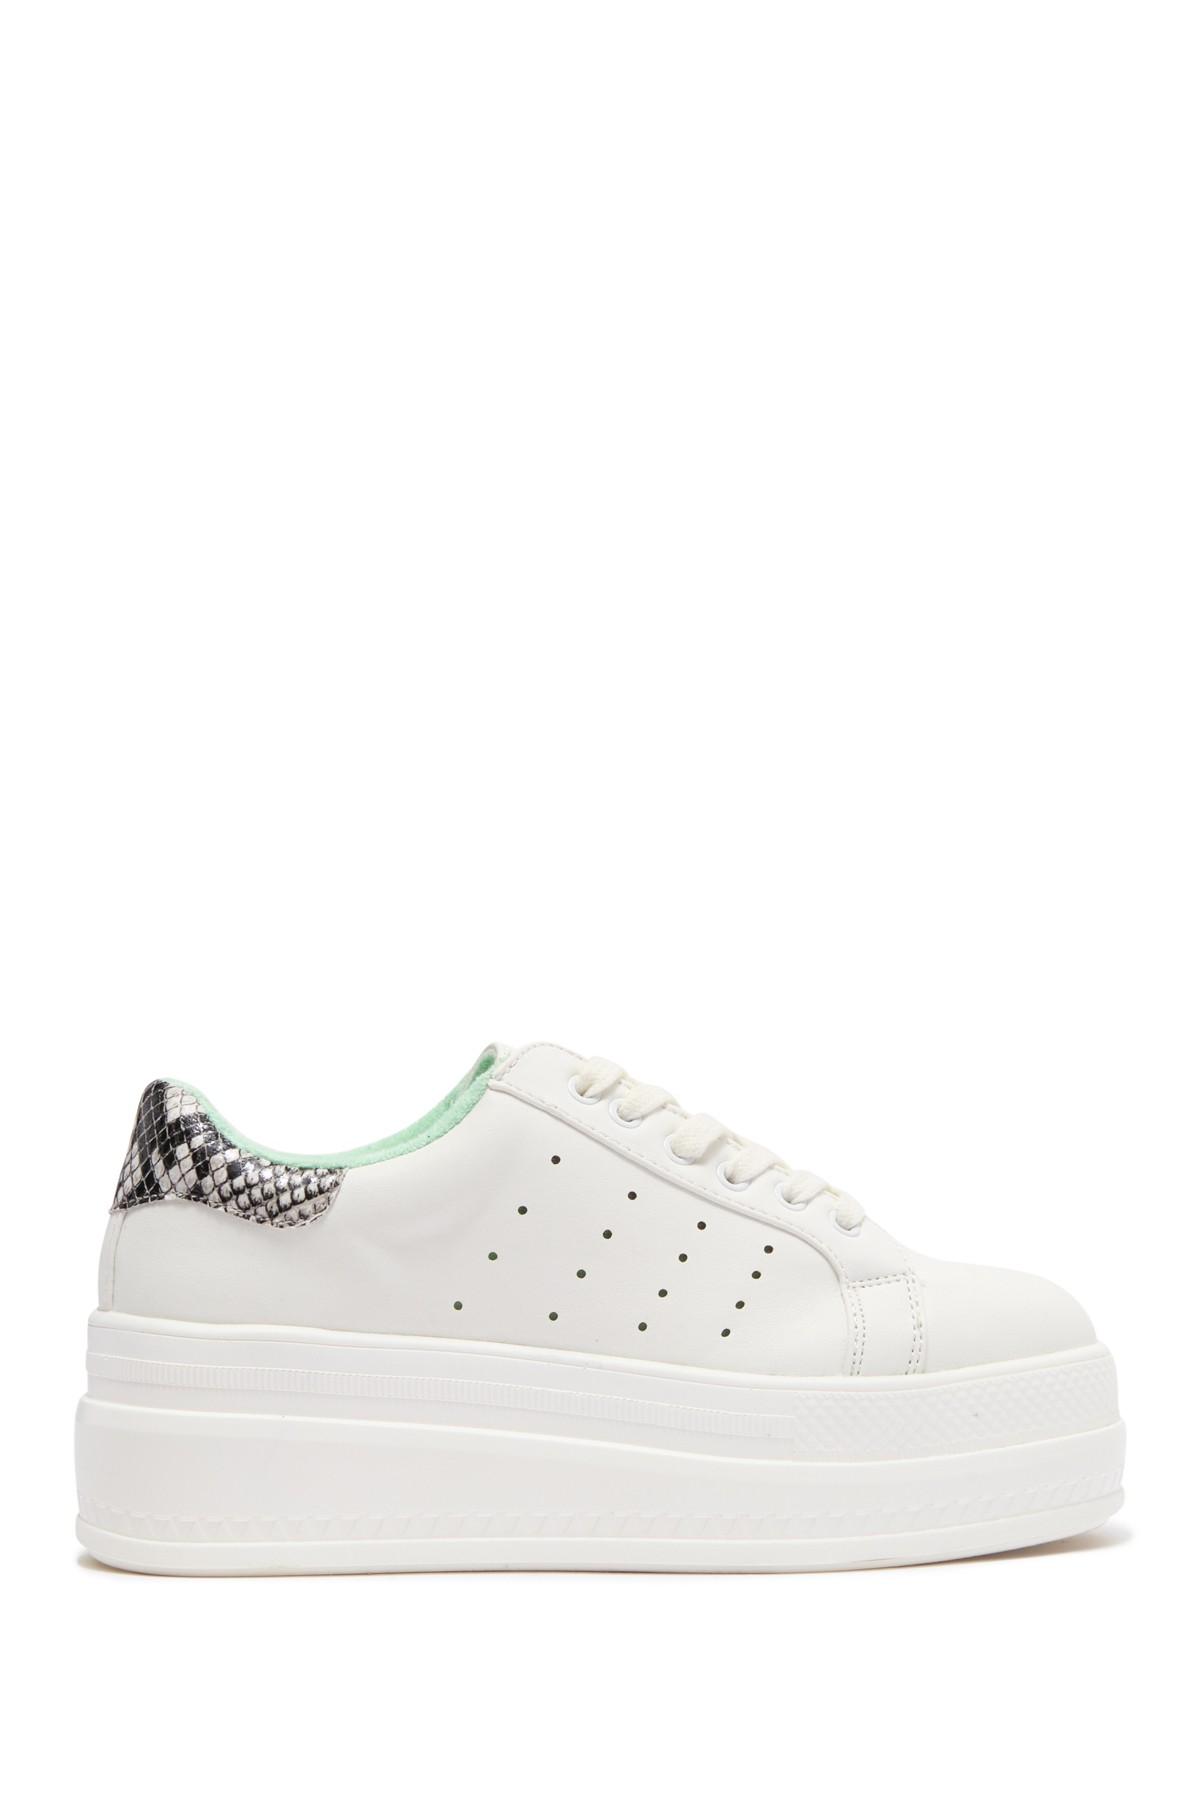 Madden Girl Synthetic Cheers Platform Sneaker in White - Lyst